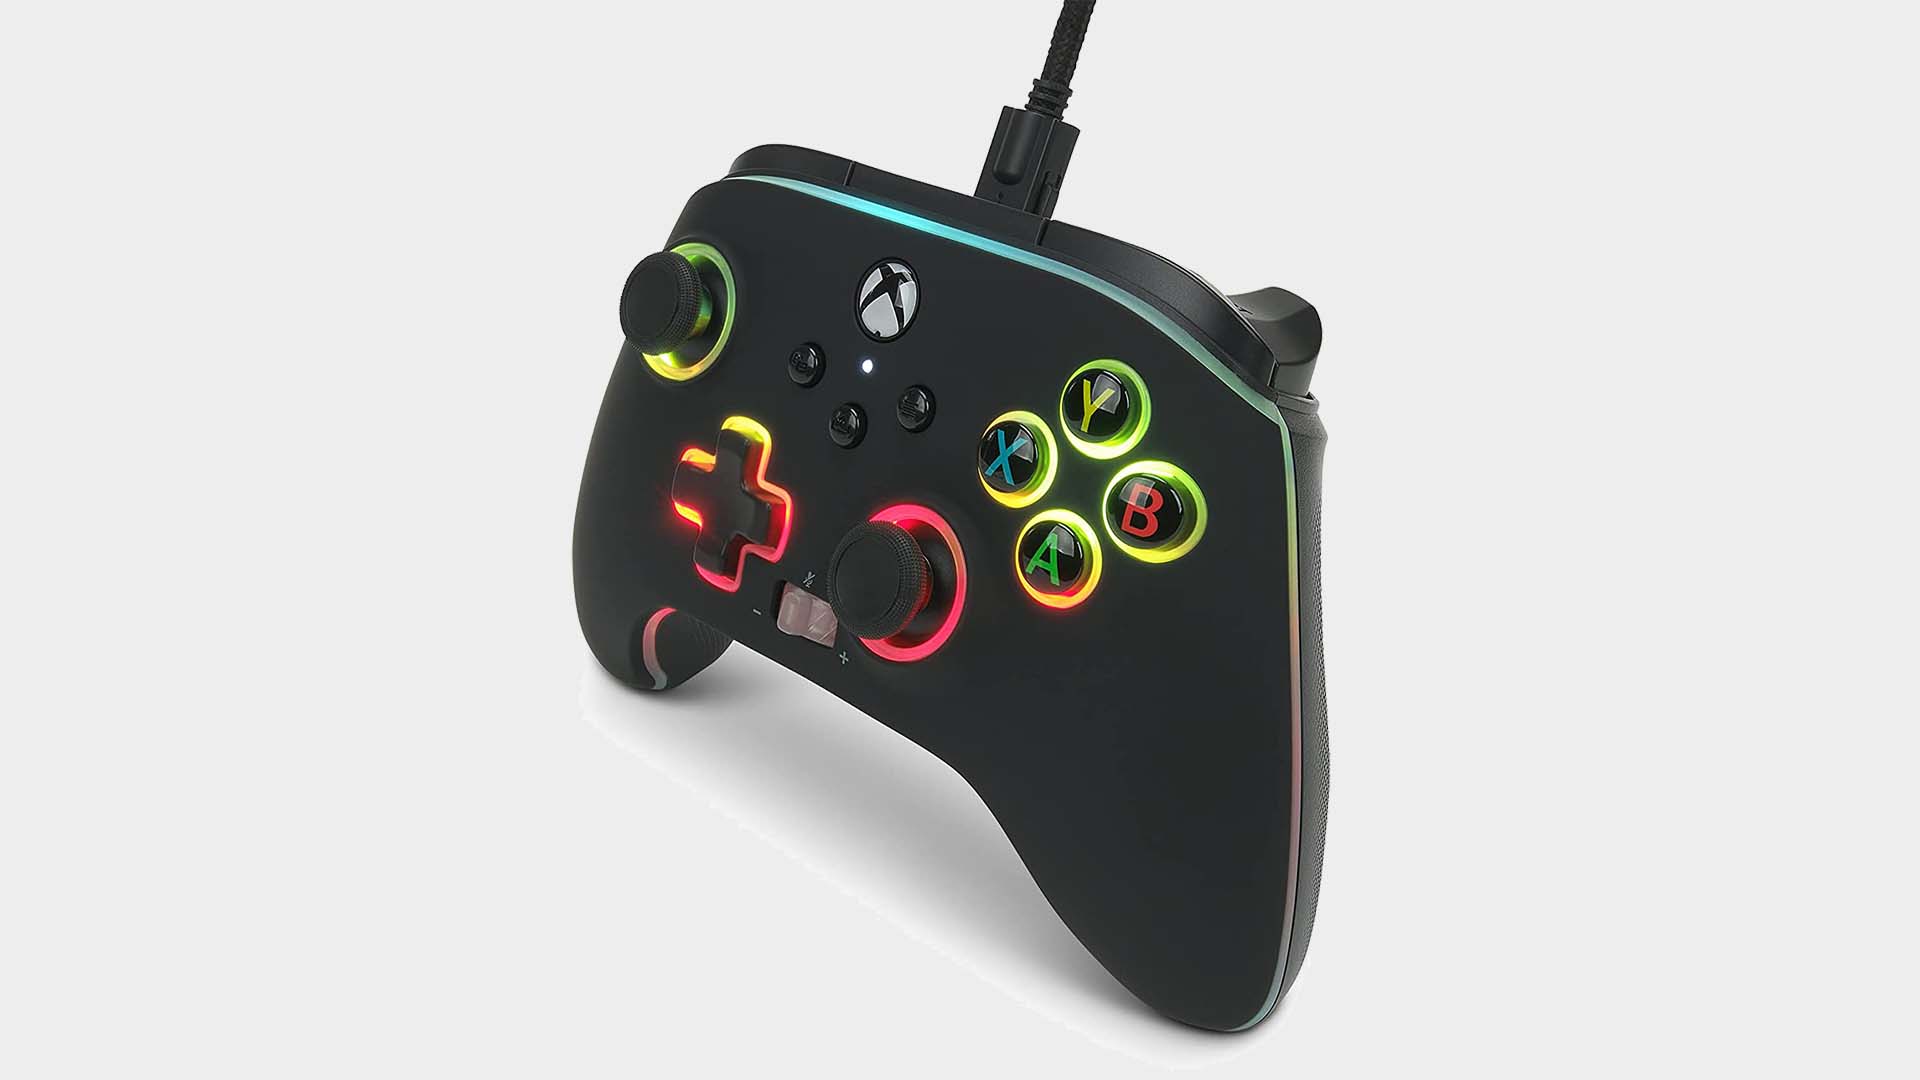 PowerA Spectra Infinity Enhanced controller pictured from various angles with lighting enabled.